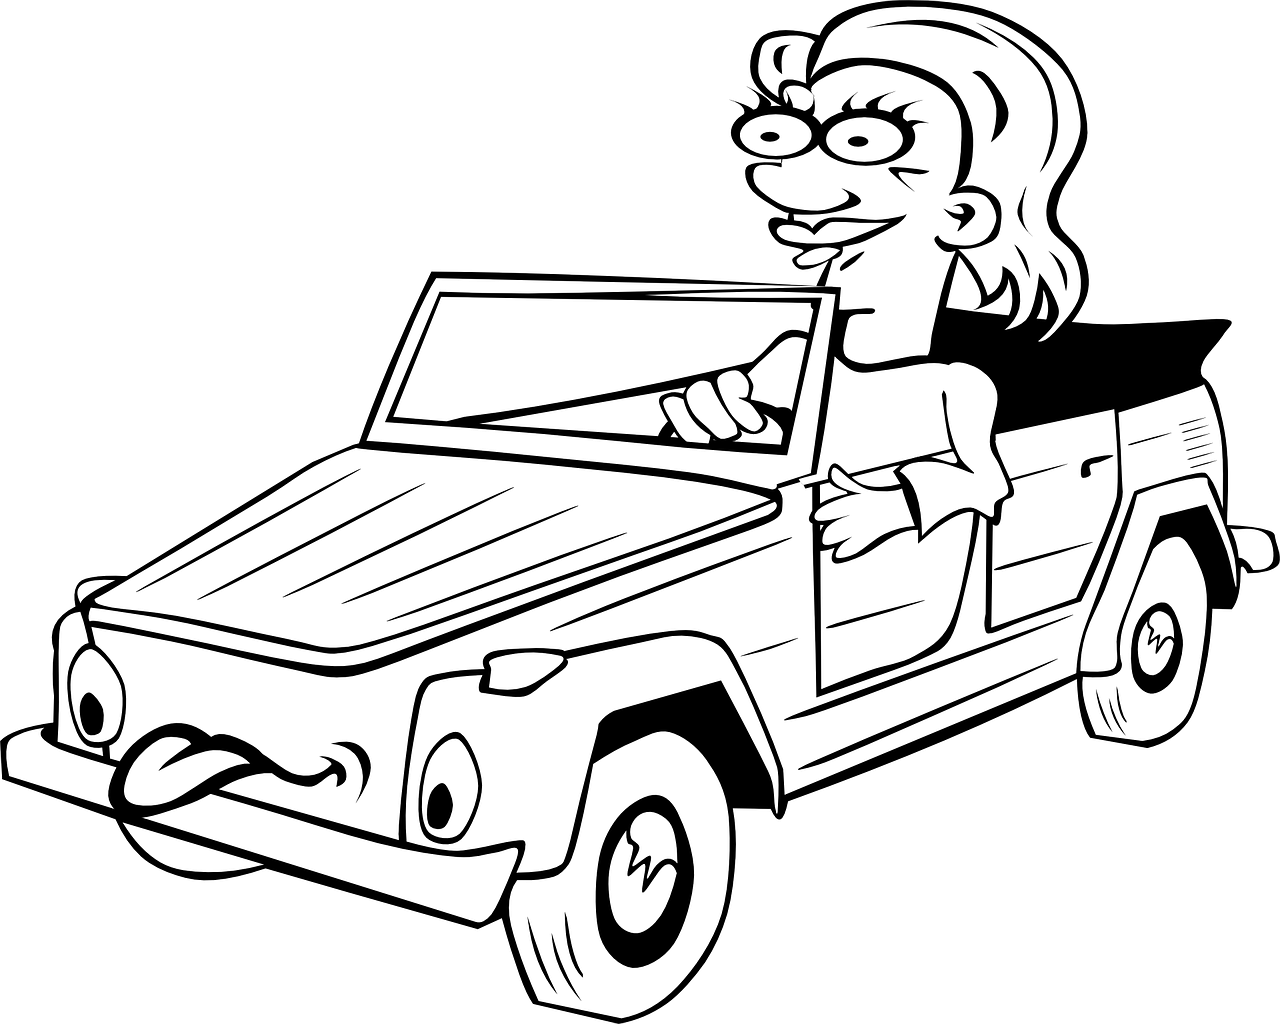 11 Pics of Funny Car Dragster Coloring Pages - Drag Car Coloring ...